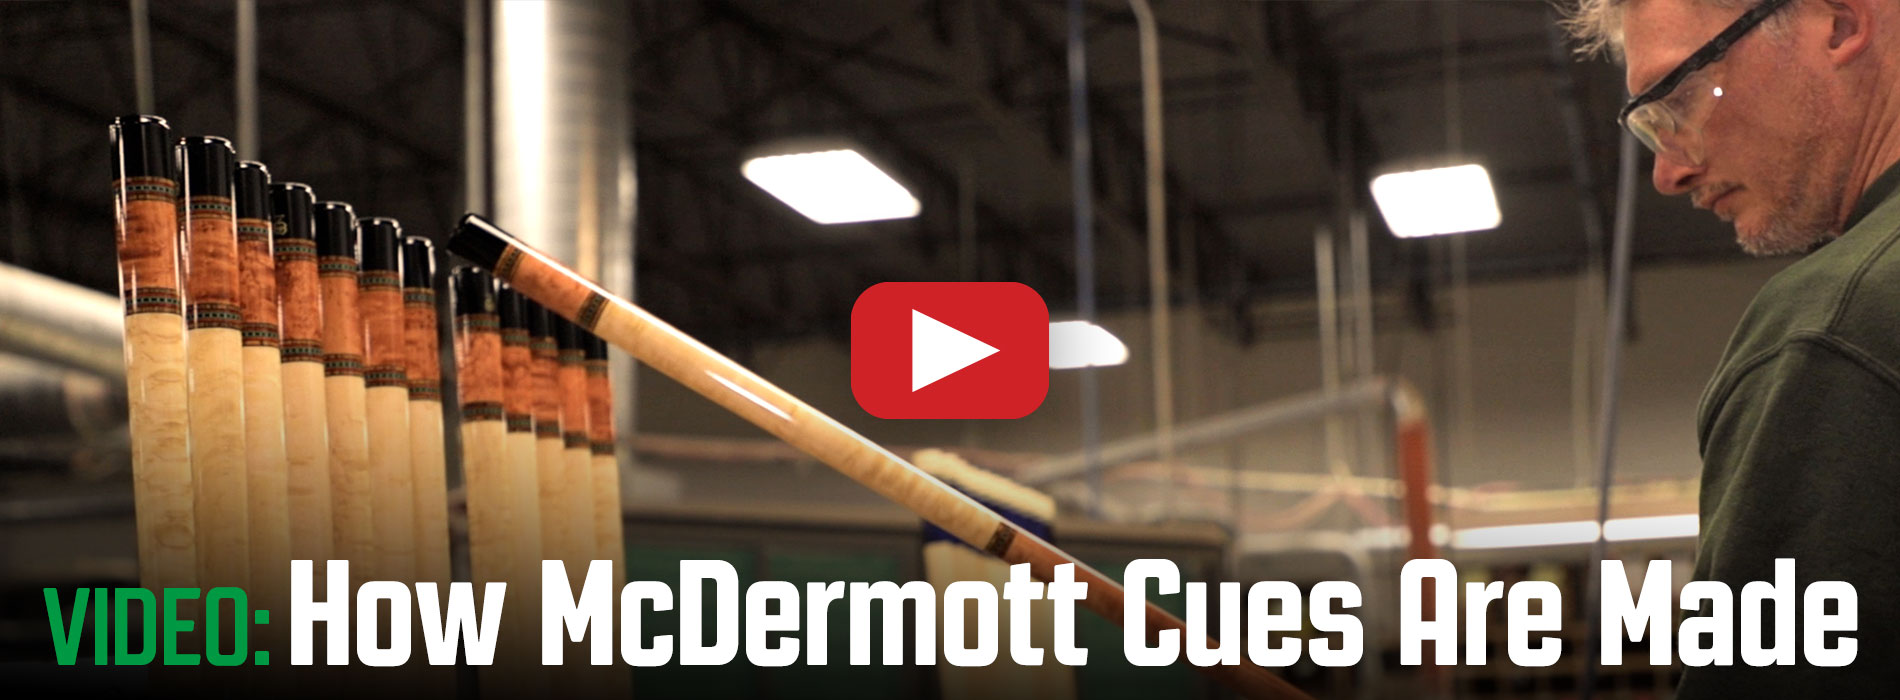 Video: How McDermott Cues Are Made